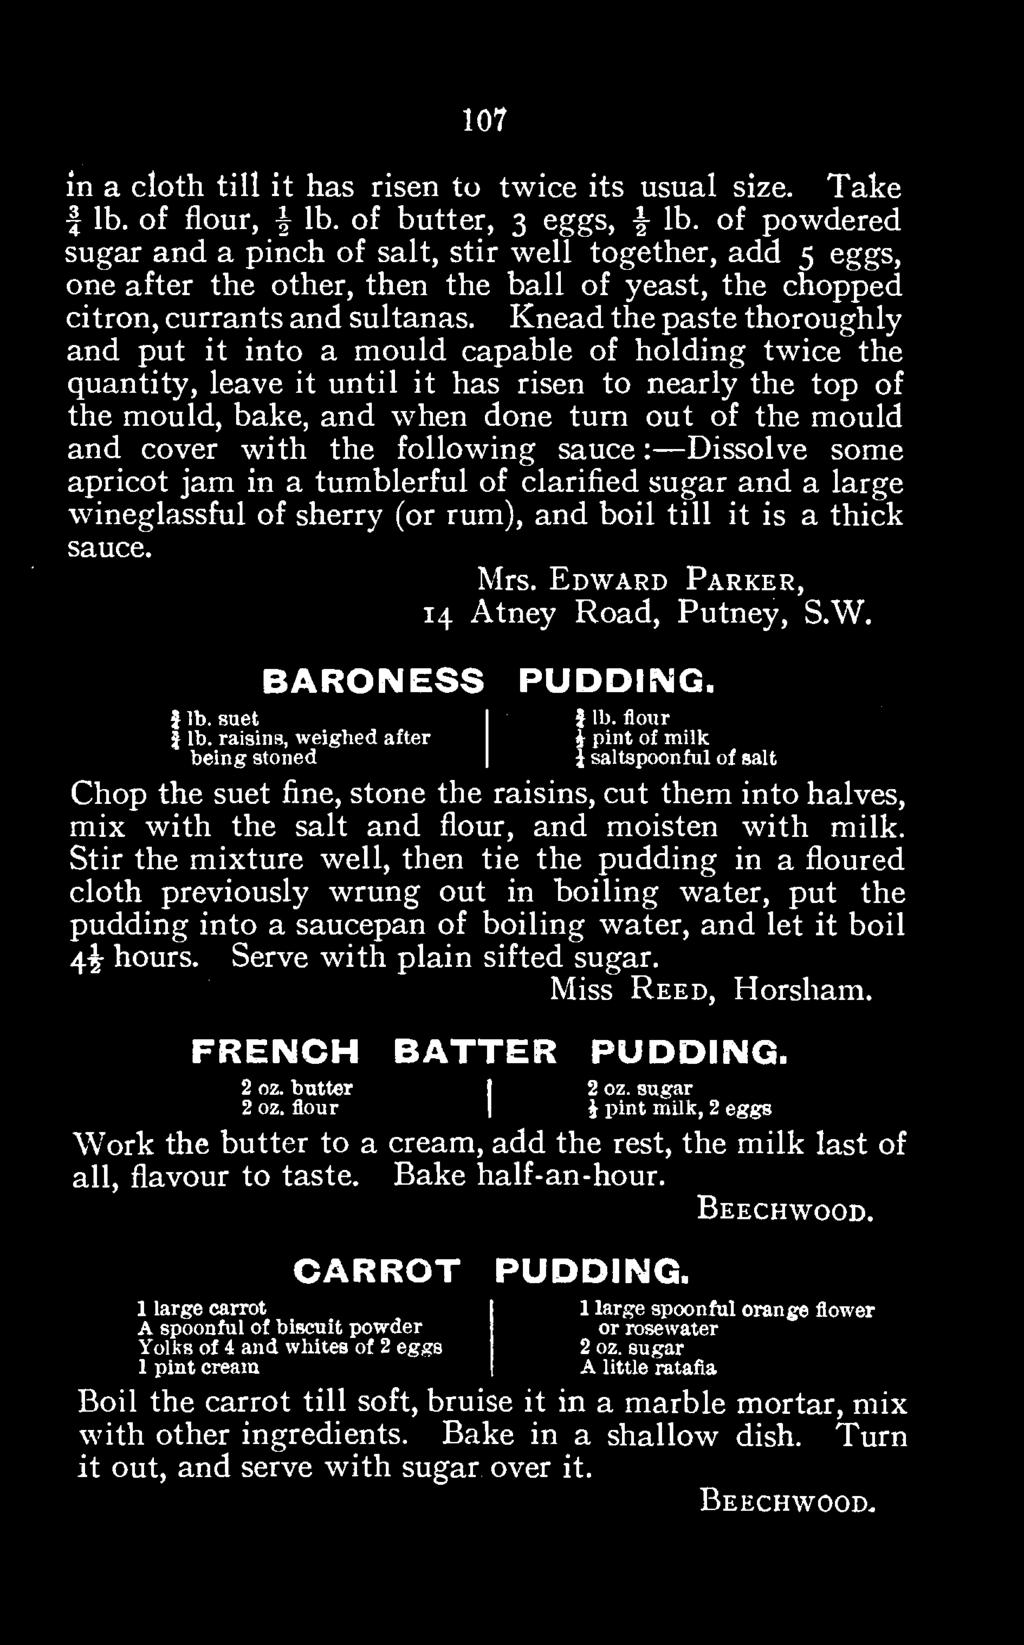 Edward Parker, 14 Atney Road, Putney, S.W. BARONESS PUDDING. J I lb. suet raisins, weighed after 1 i pint lb.